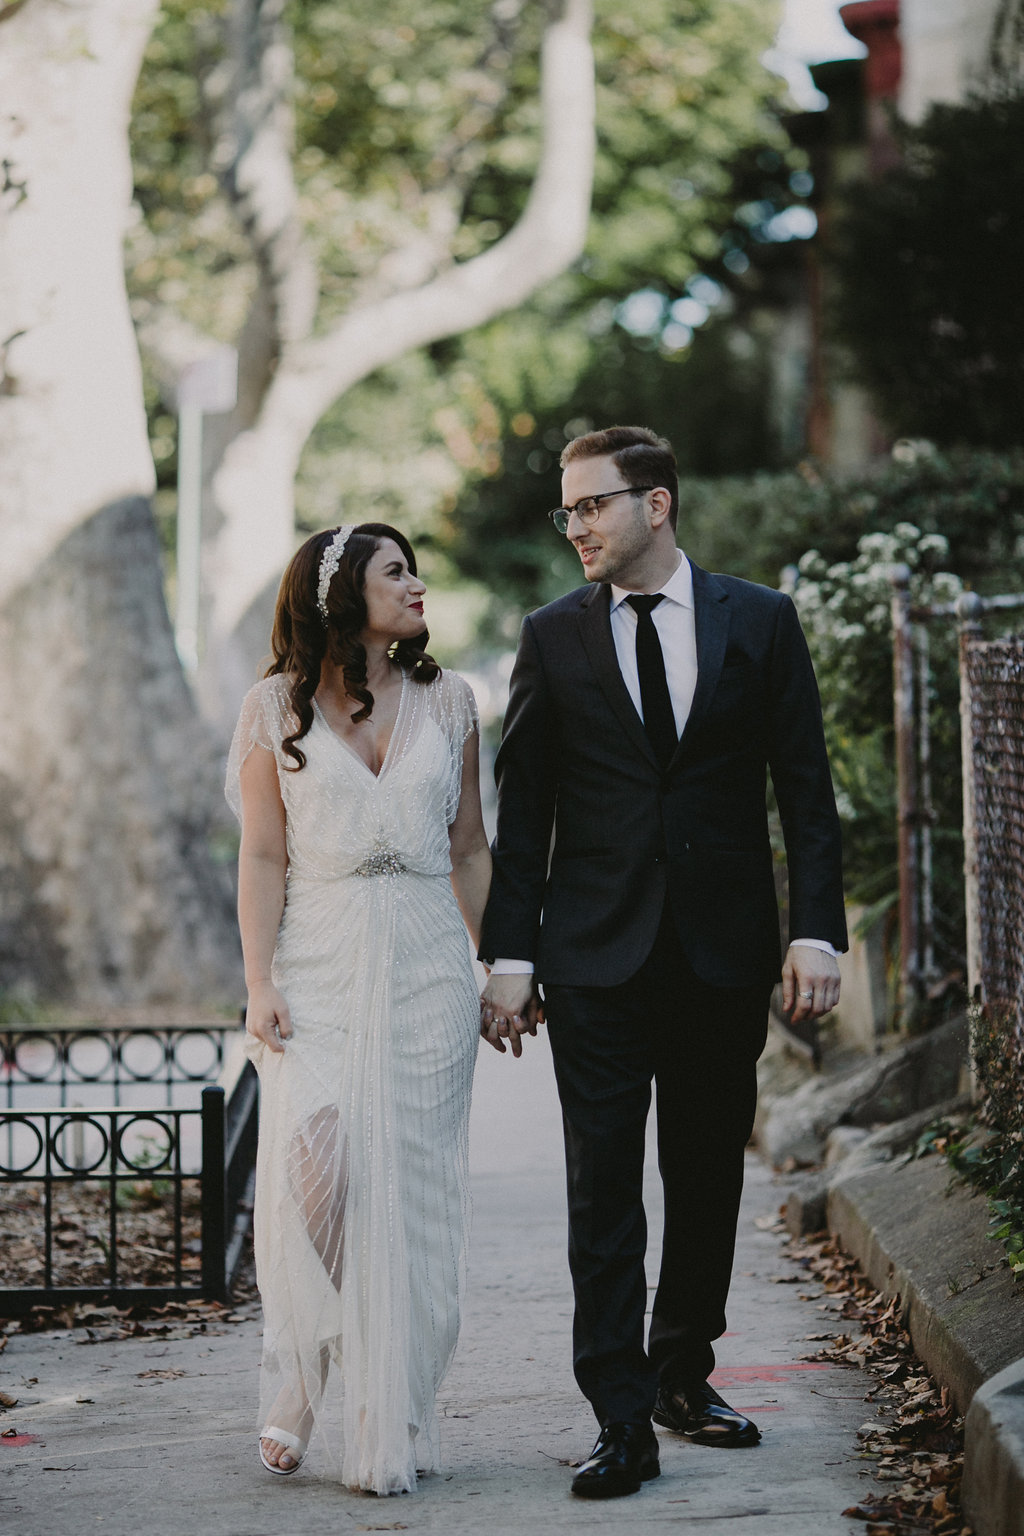 New York weddings - photo by Chellise Michael Photography https://ruffledblog.com/vintage-inspired-multicultural-wedding-in-palisades-ny